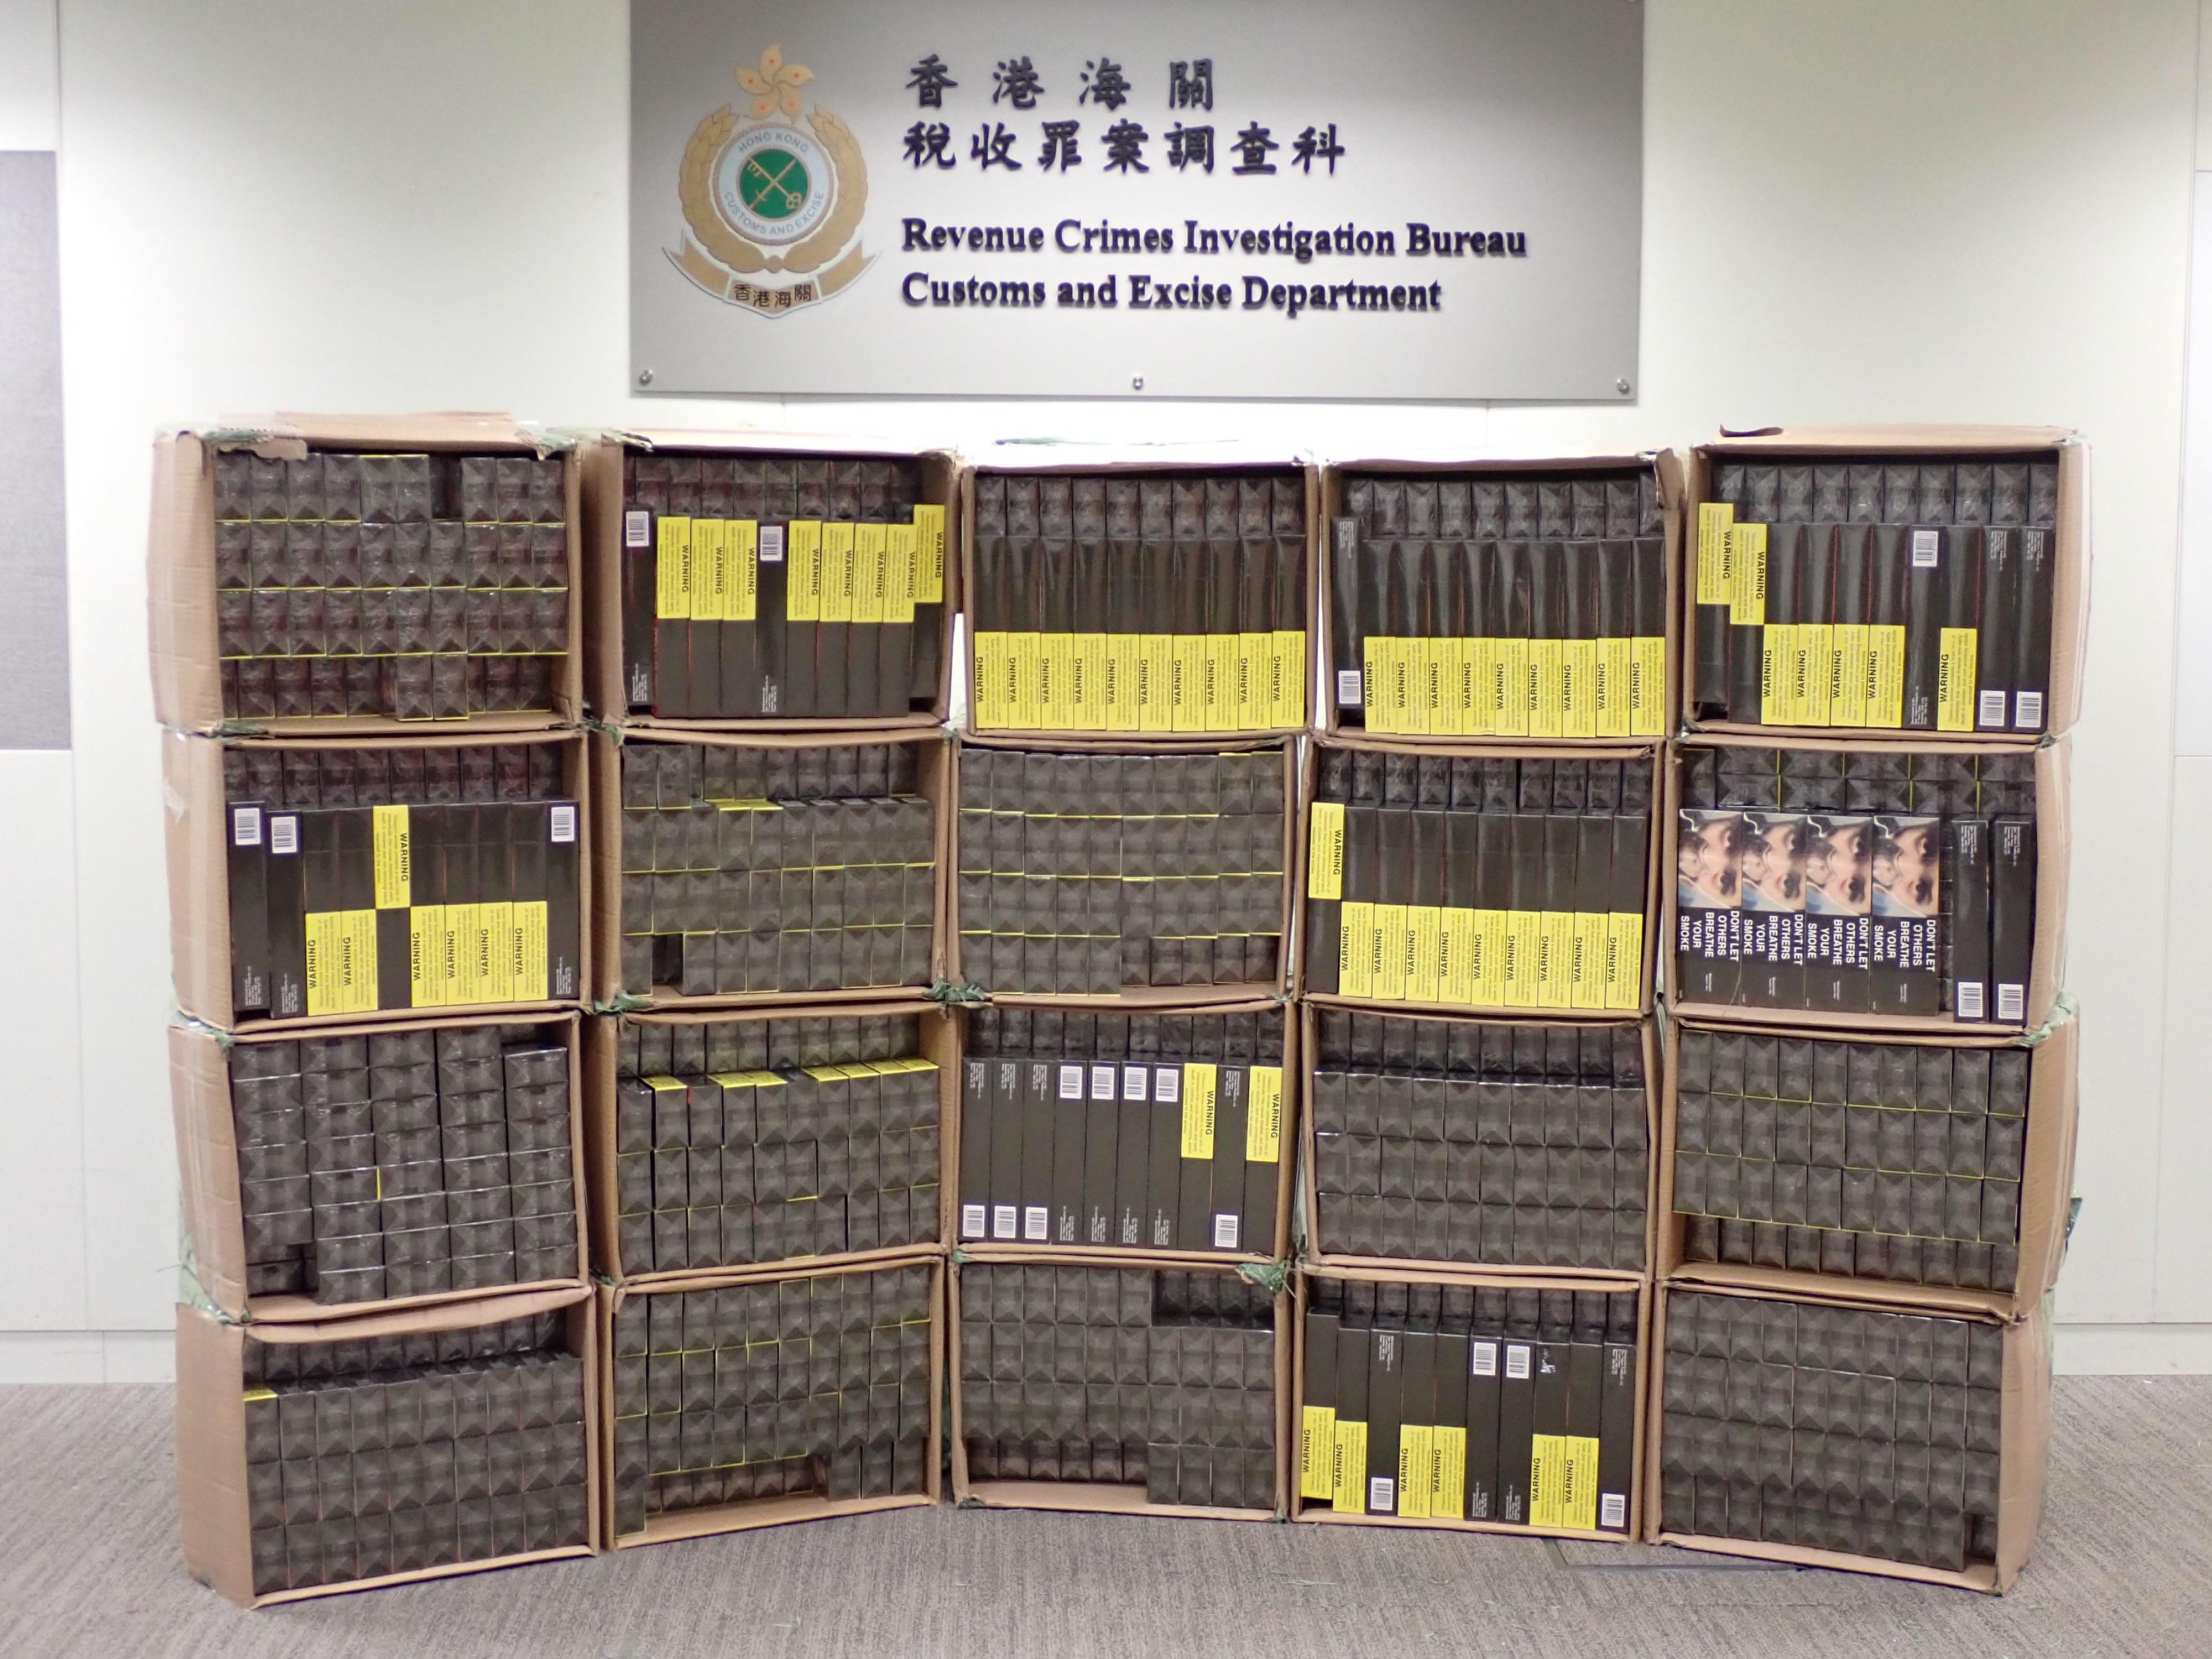 Hong Kong Customs in a special operation to combat the export of illicit cigarettes conducted between September 7 and 12 detected five cases in Yuen Long and Kwai Chung, and seized a total of about 2.7 million suspected illicit cigarettes with an estimated market value of about $10 million and a duty potential of about $6.8 million. Photo shows some of the suspected illicit cigarettes seized.